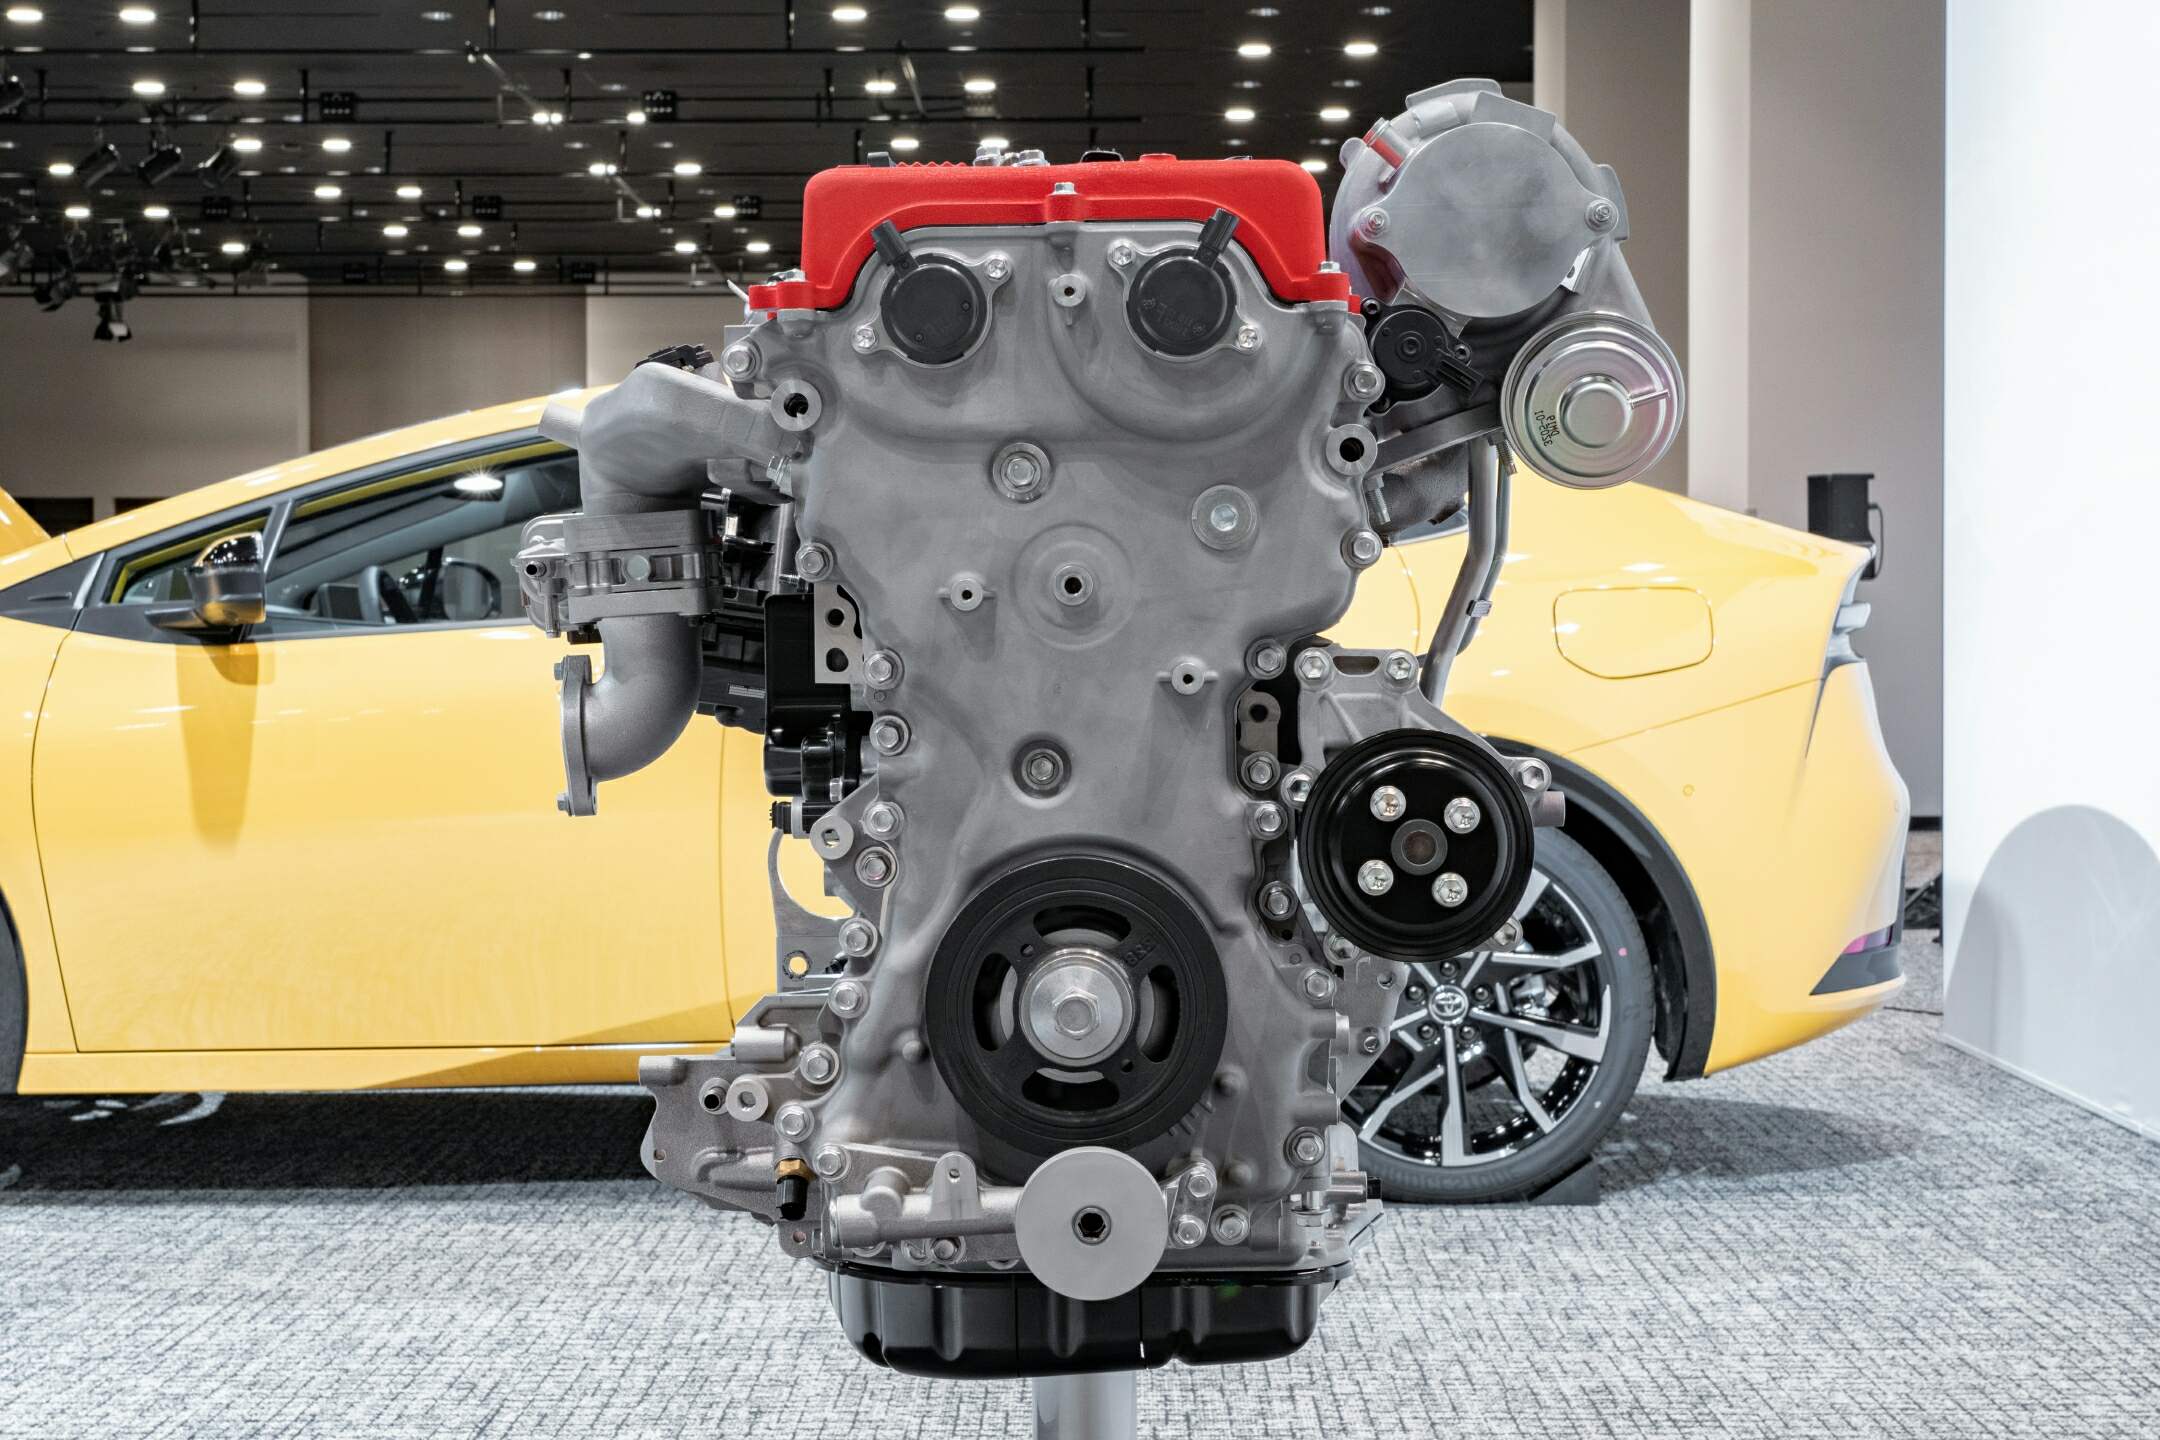 Driving Innovation Subaru, Toyota, And Mazda Join Forces For Carbon-Neutral Engine Development